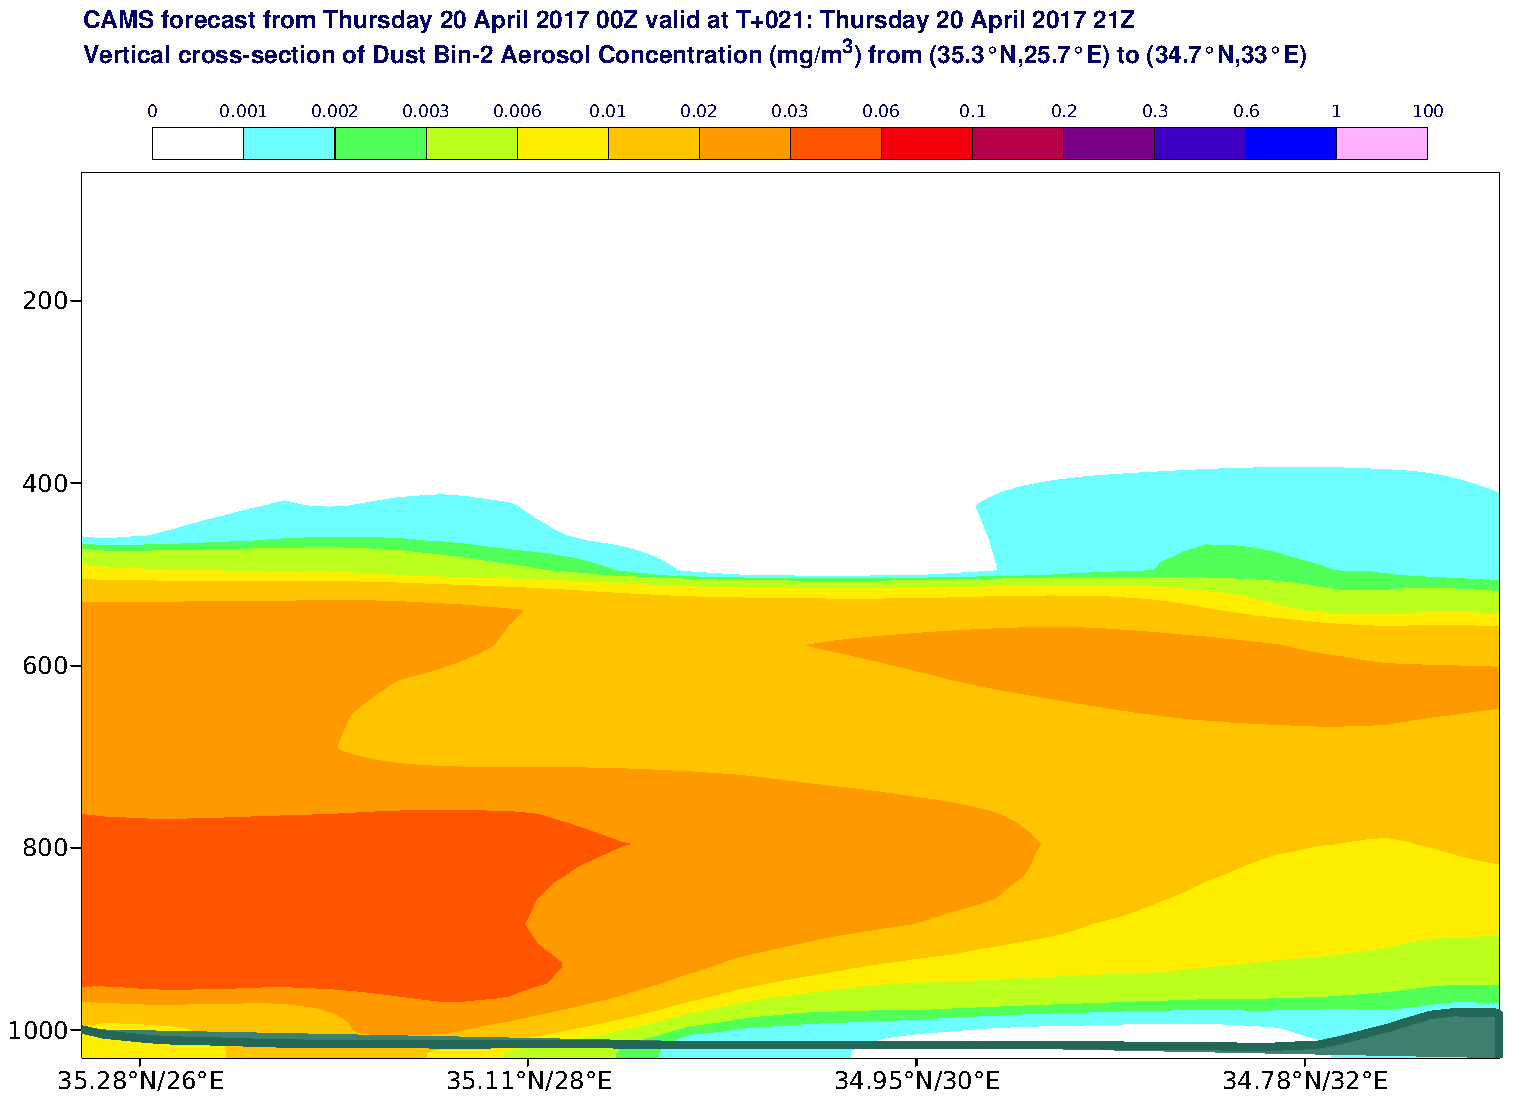 Vertical cross-section of Dust Bin-2 Aerosol Concentration (mg/m3) valid at T21 - 2017-04-20 21:00